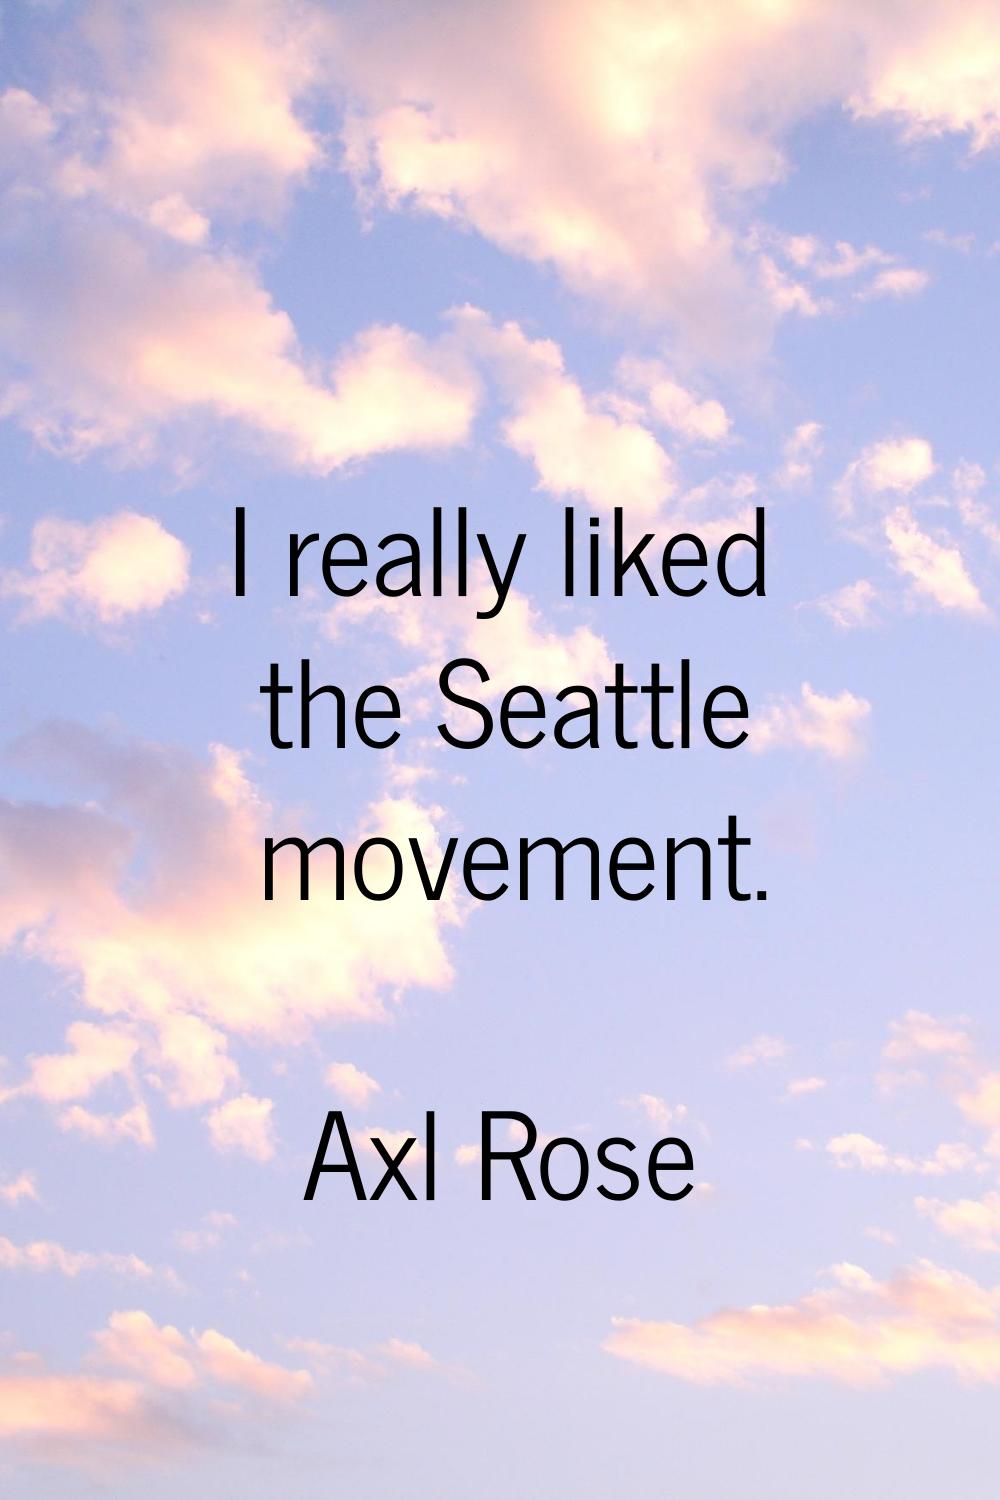 I really liked the Seattle movement.